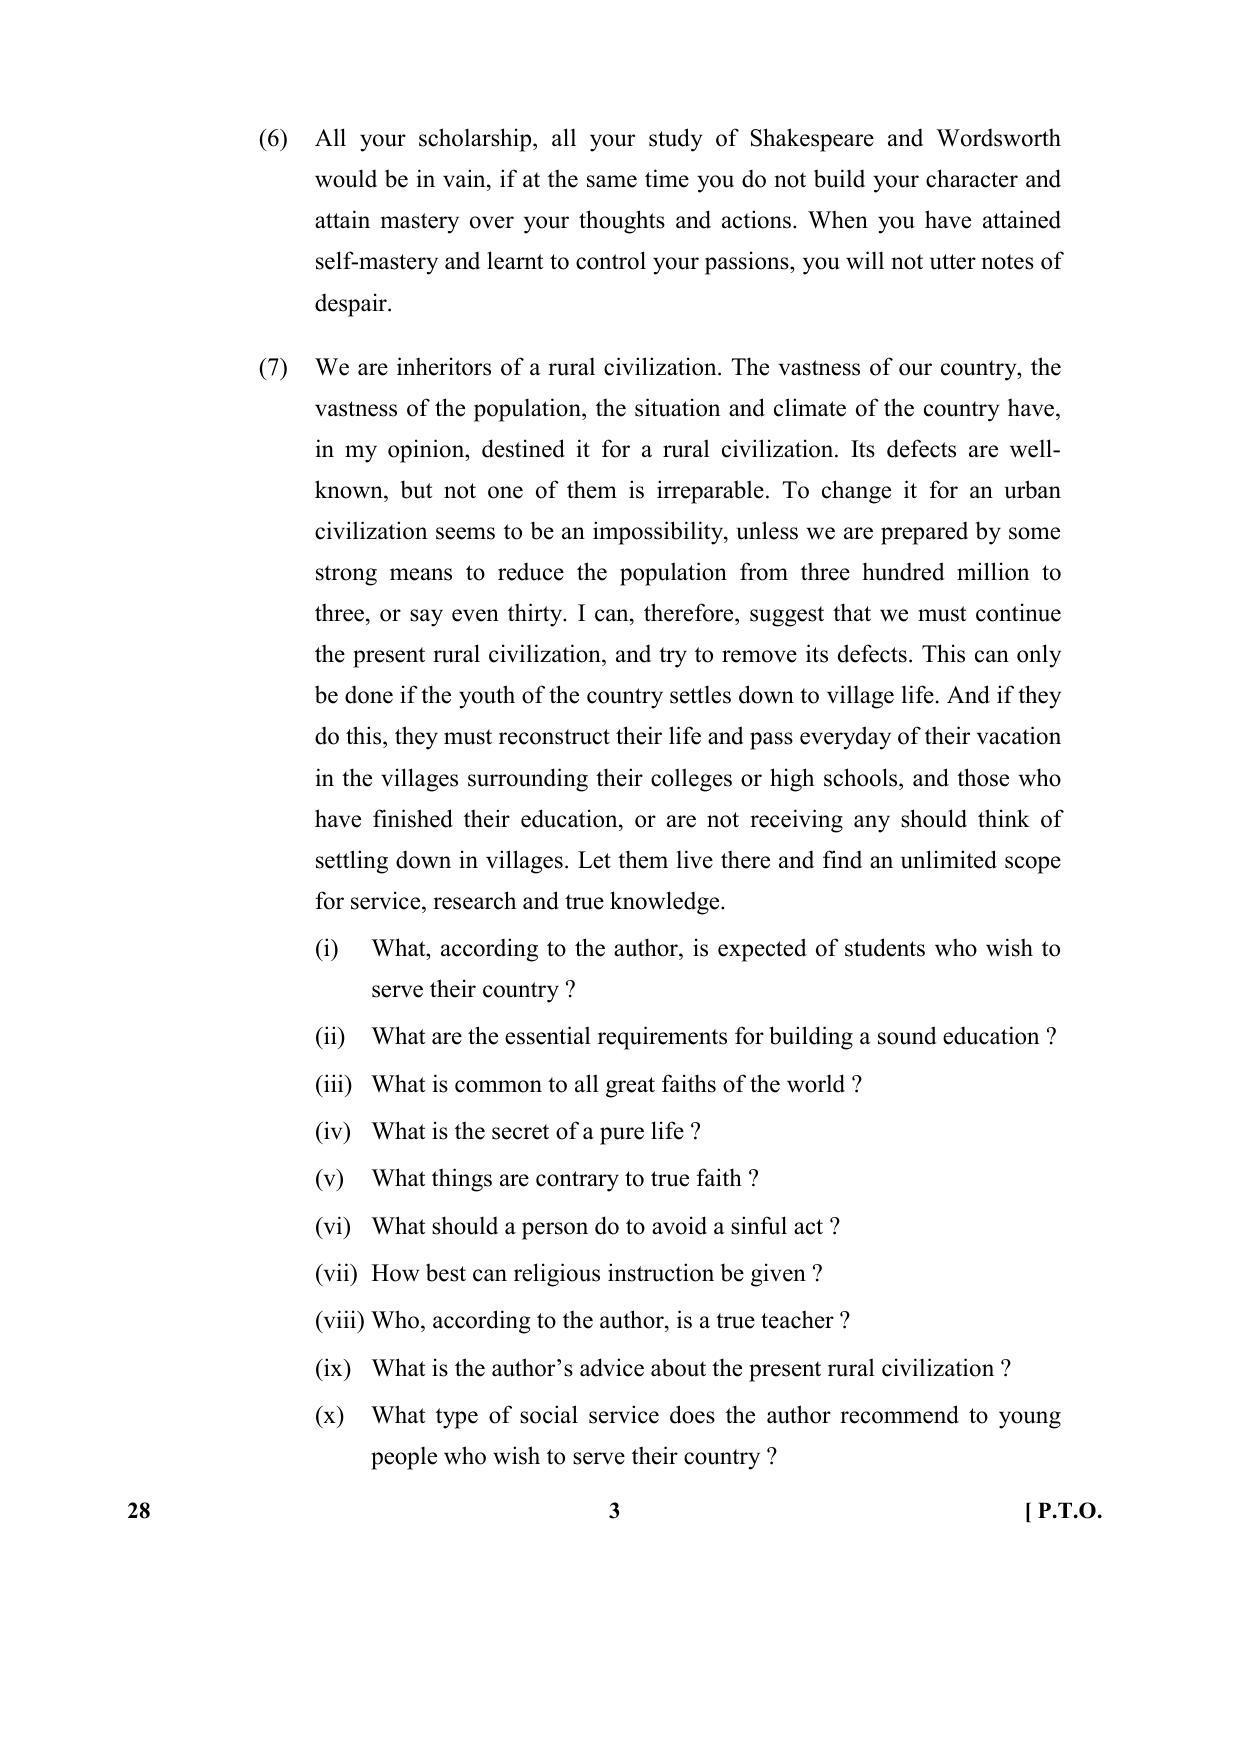 CBSE Class 12 28 (English) Elec 2017-comptt Question Paper - Page 3